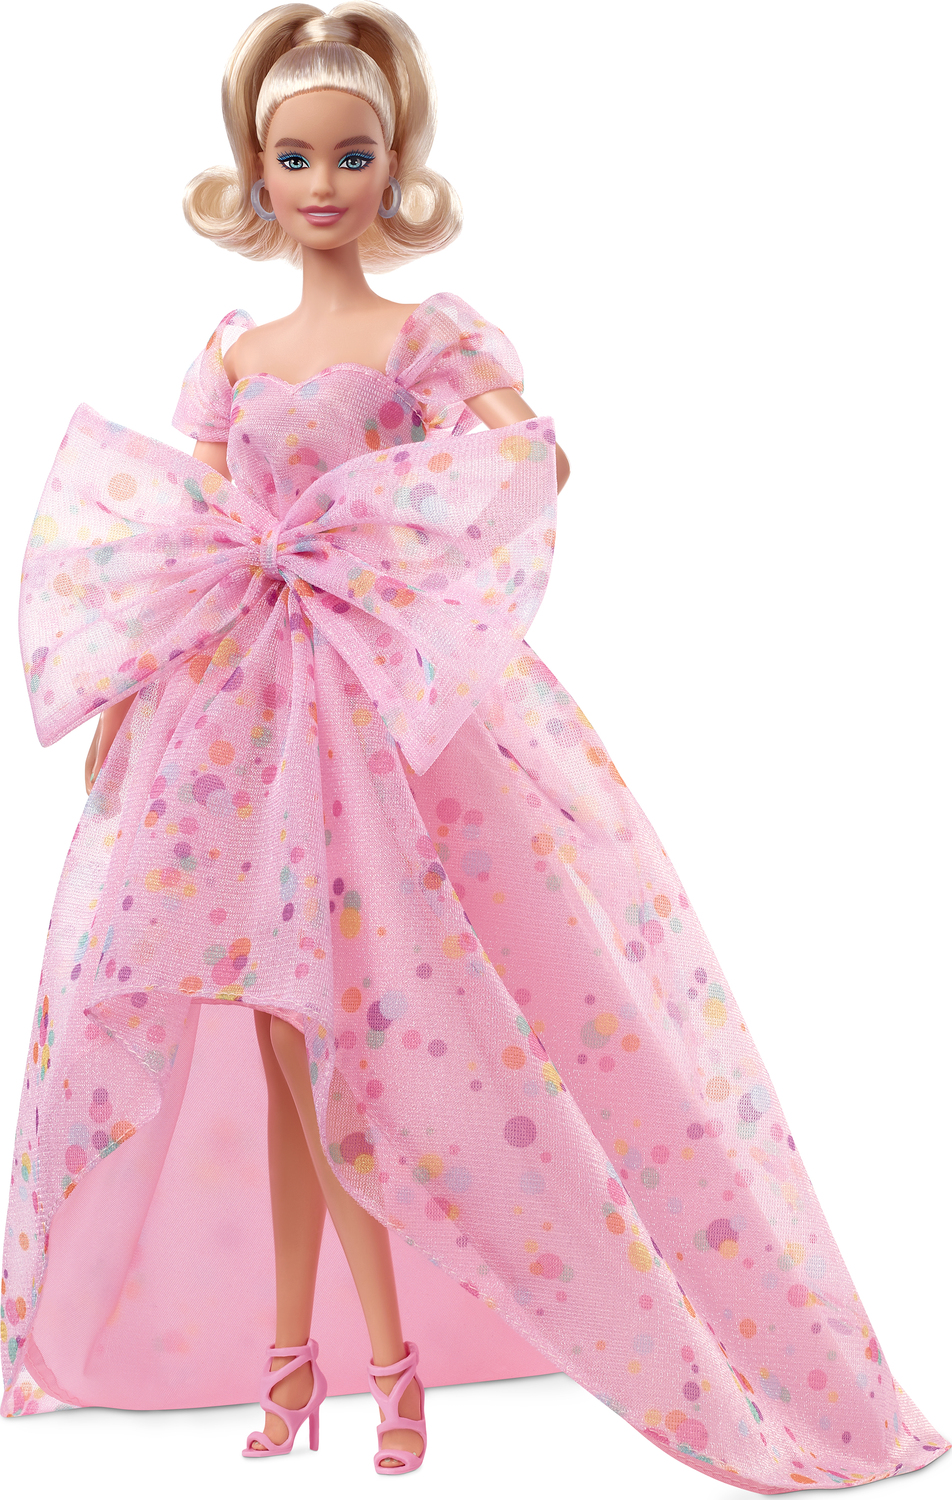 Barbie Birthday Wishes Doll - Toys To Love